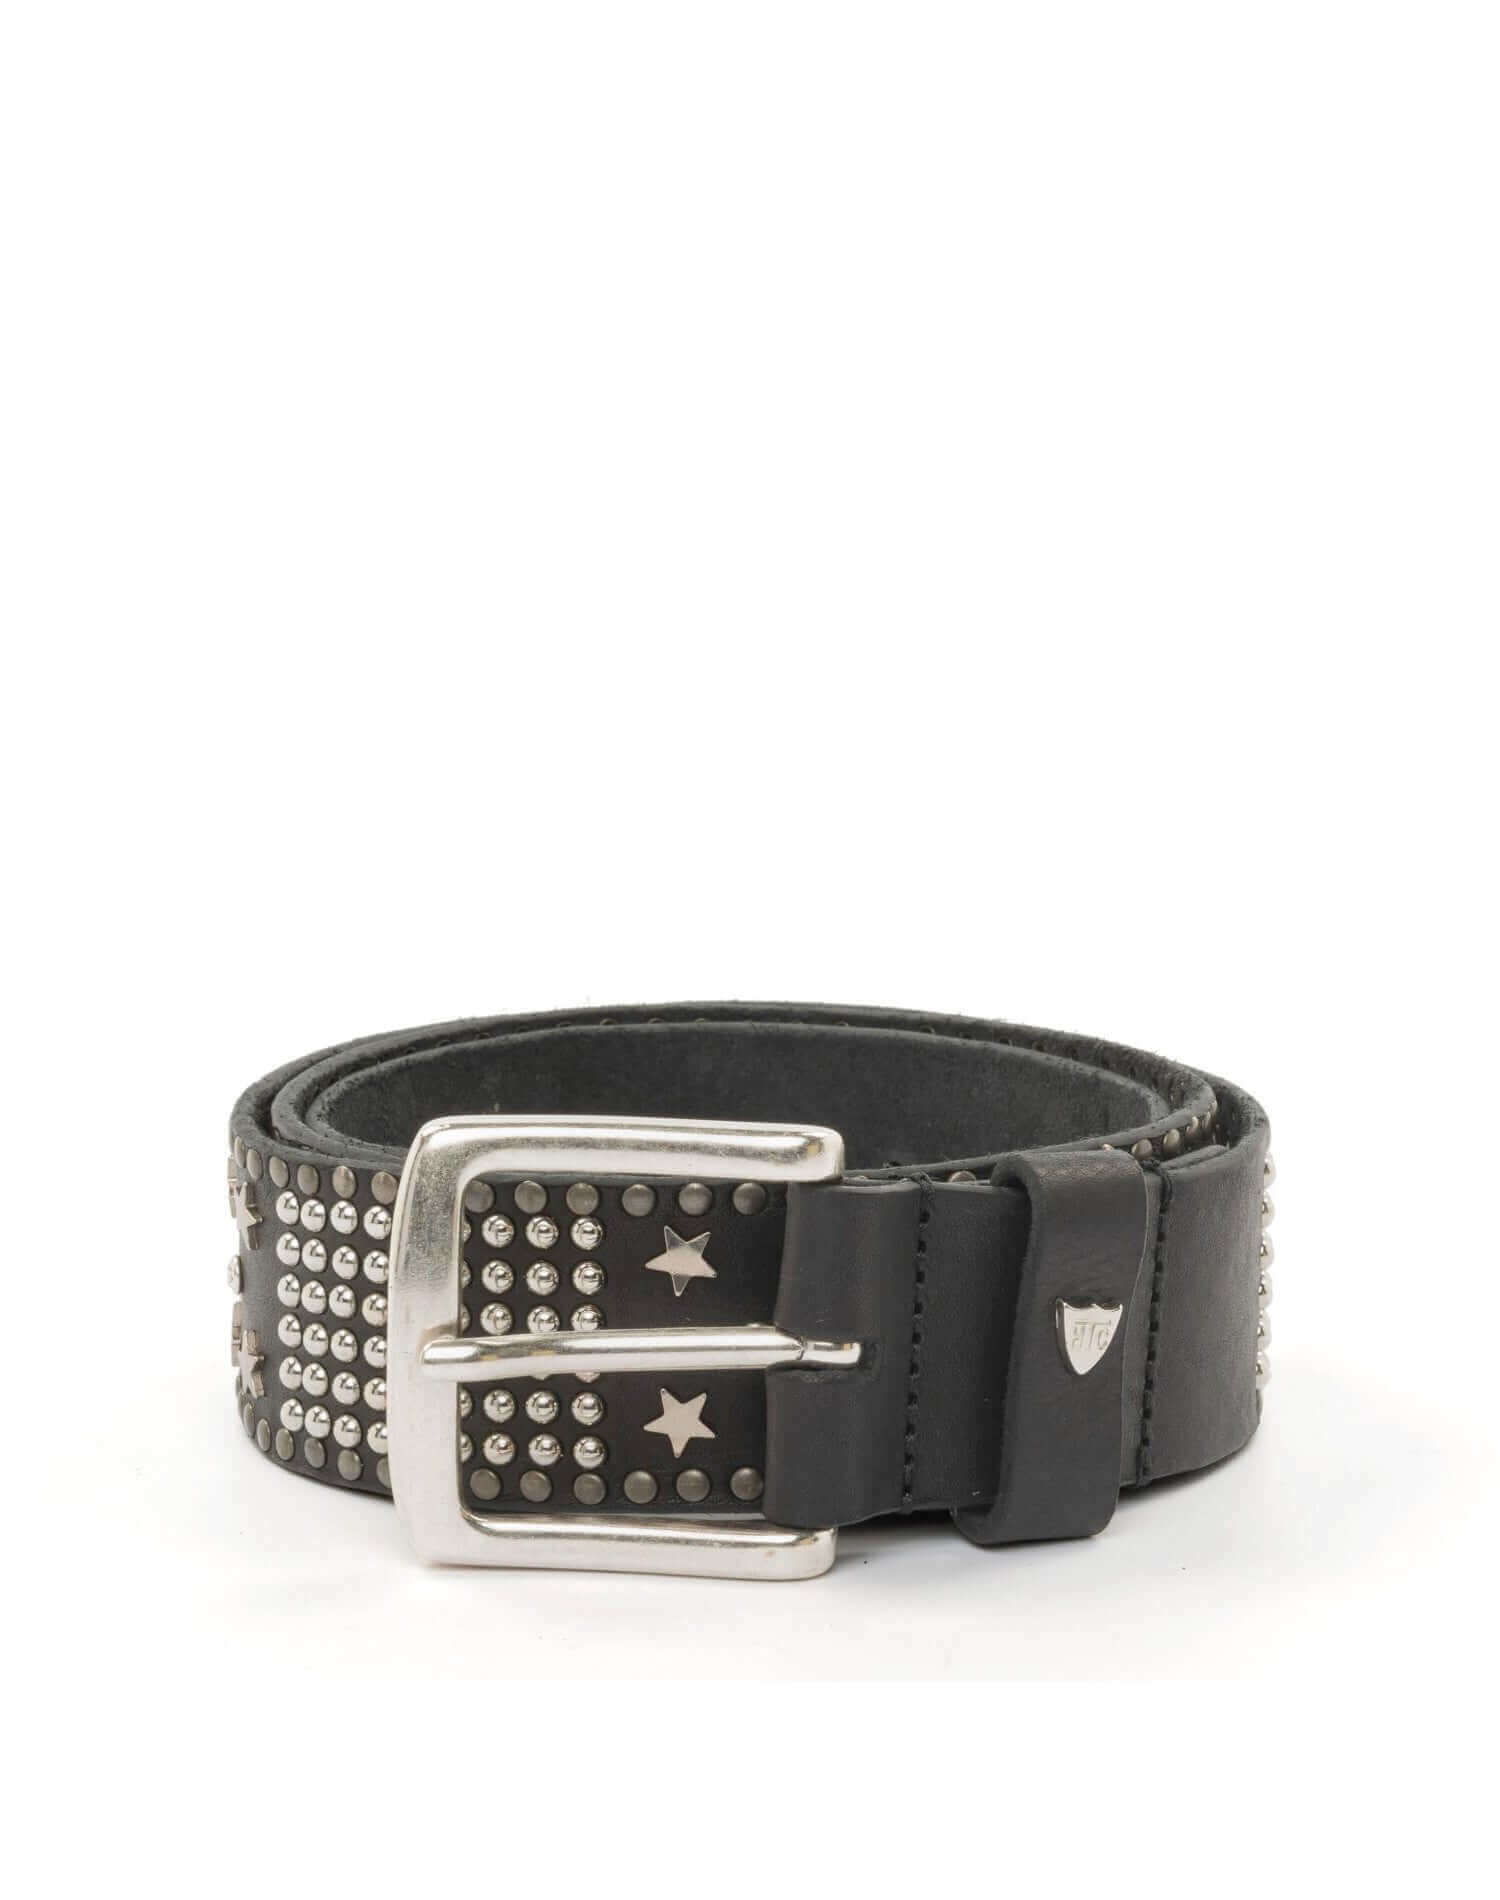 AMERICAN FLAG BELT Leather studded black belt. Brass buckle. 4 cm height. Made in Italy HTC LOS ANGELES